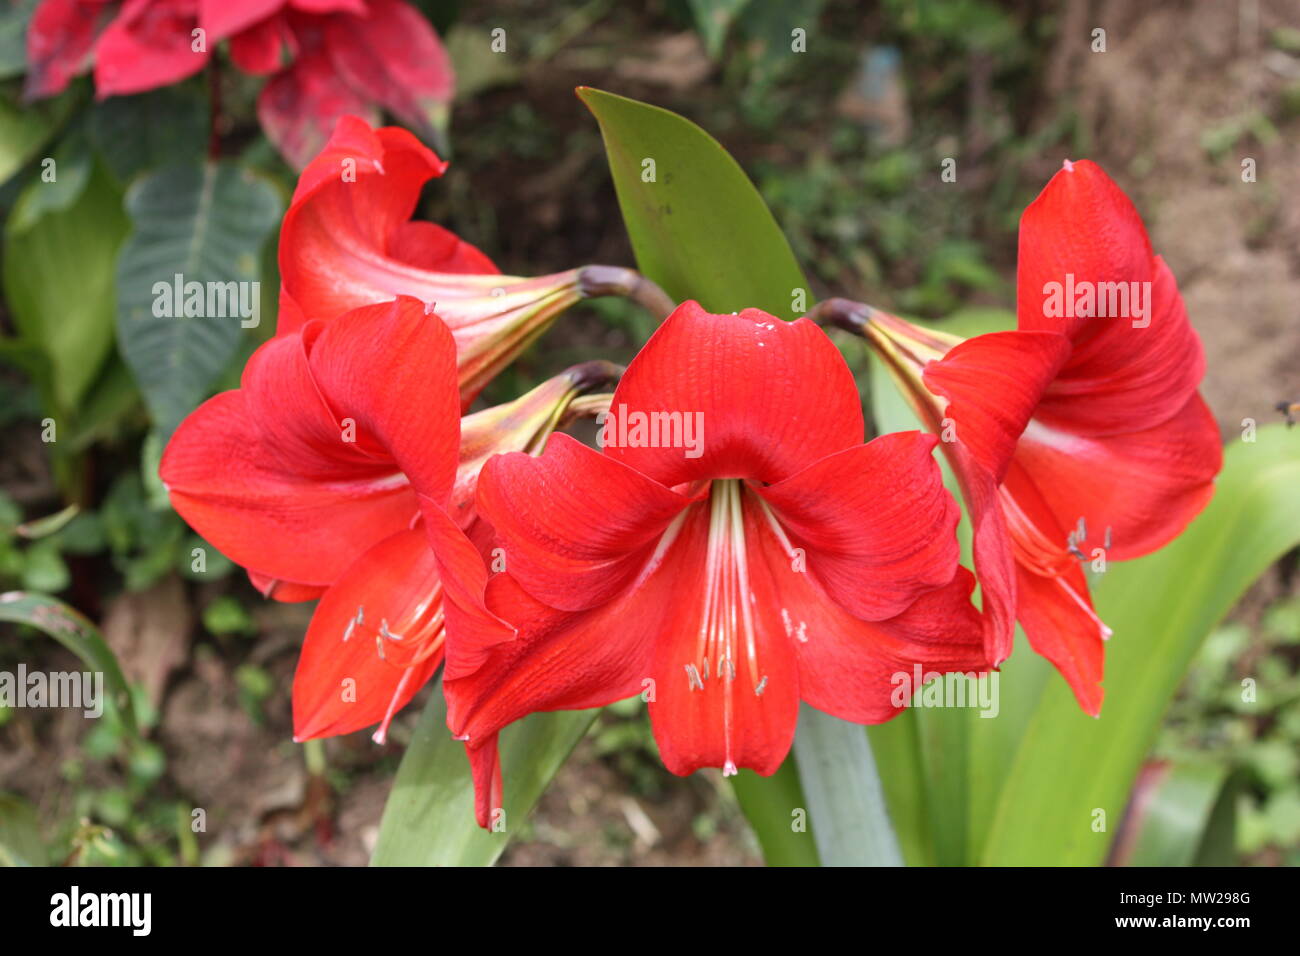 Red flower from costa rica Stock Photo